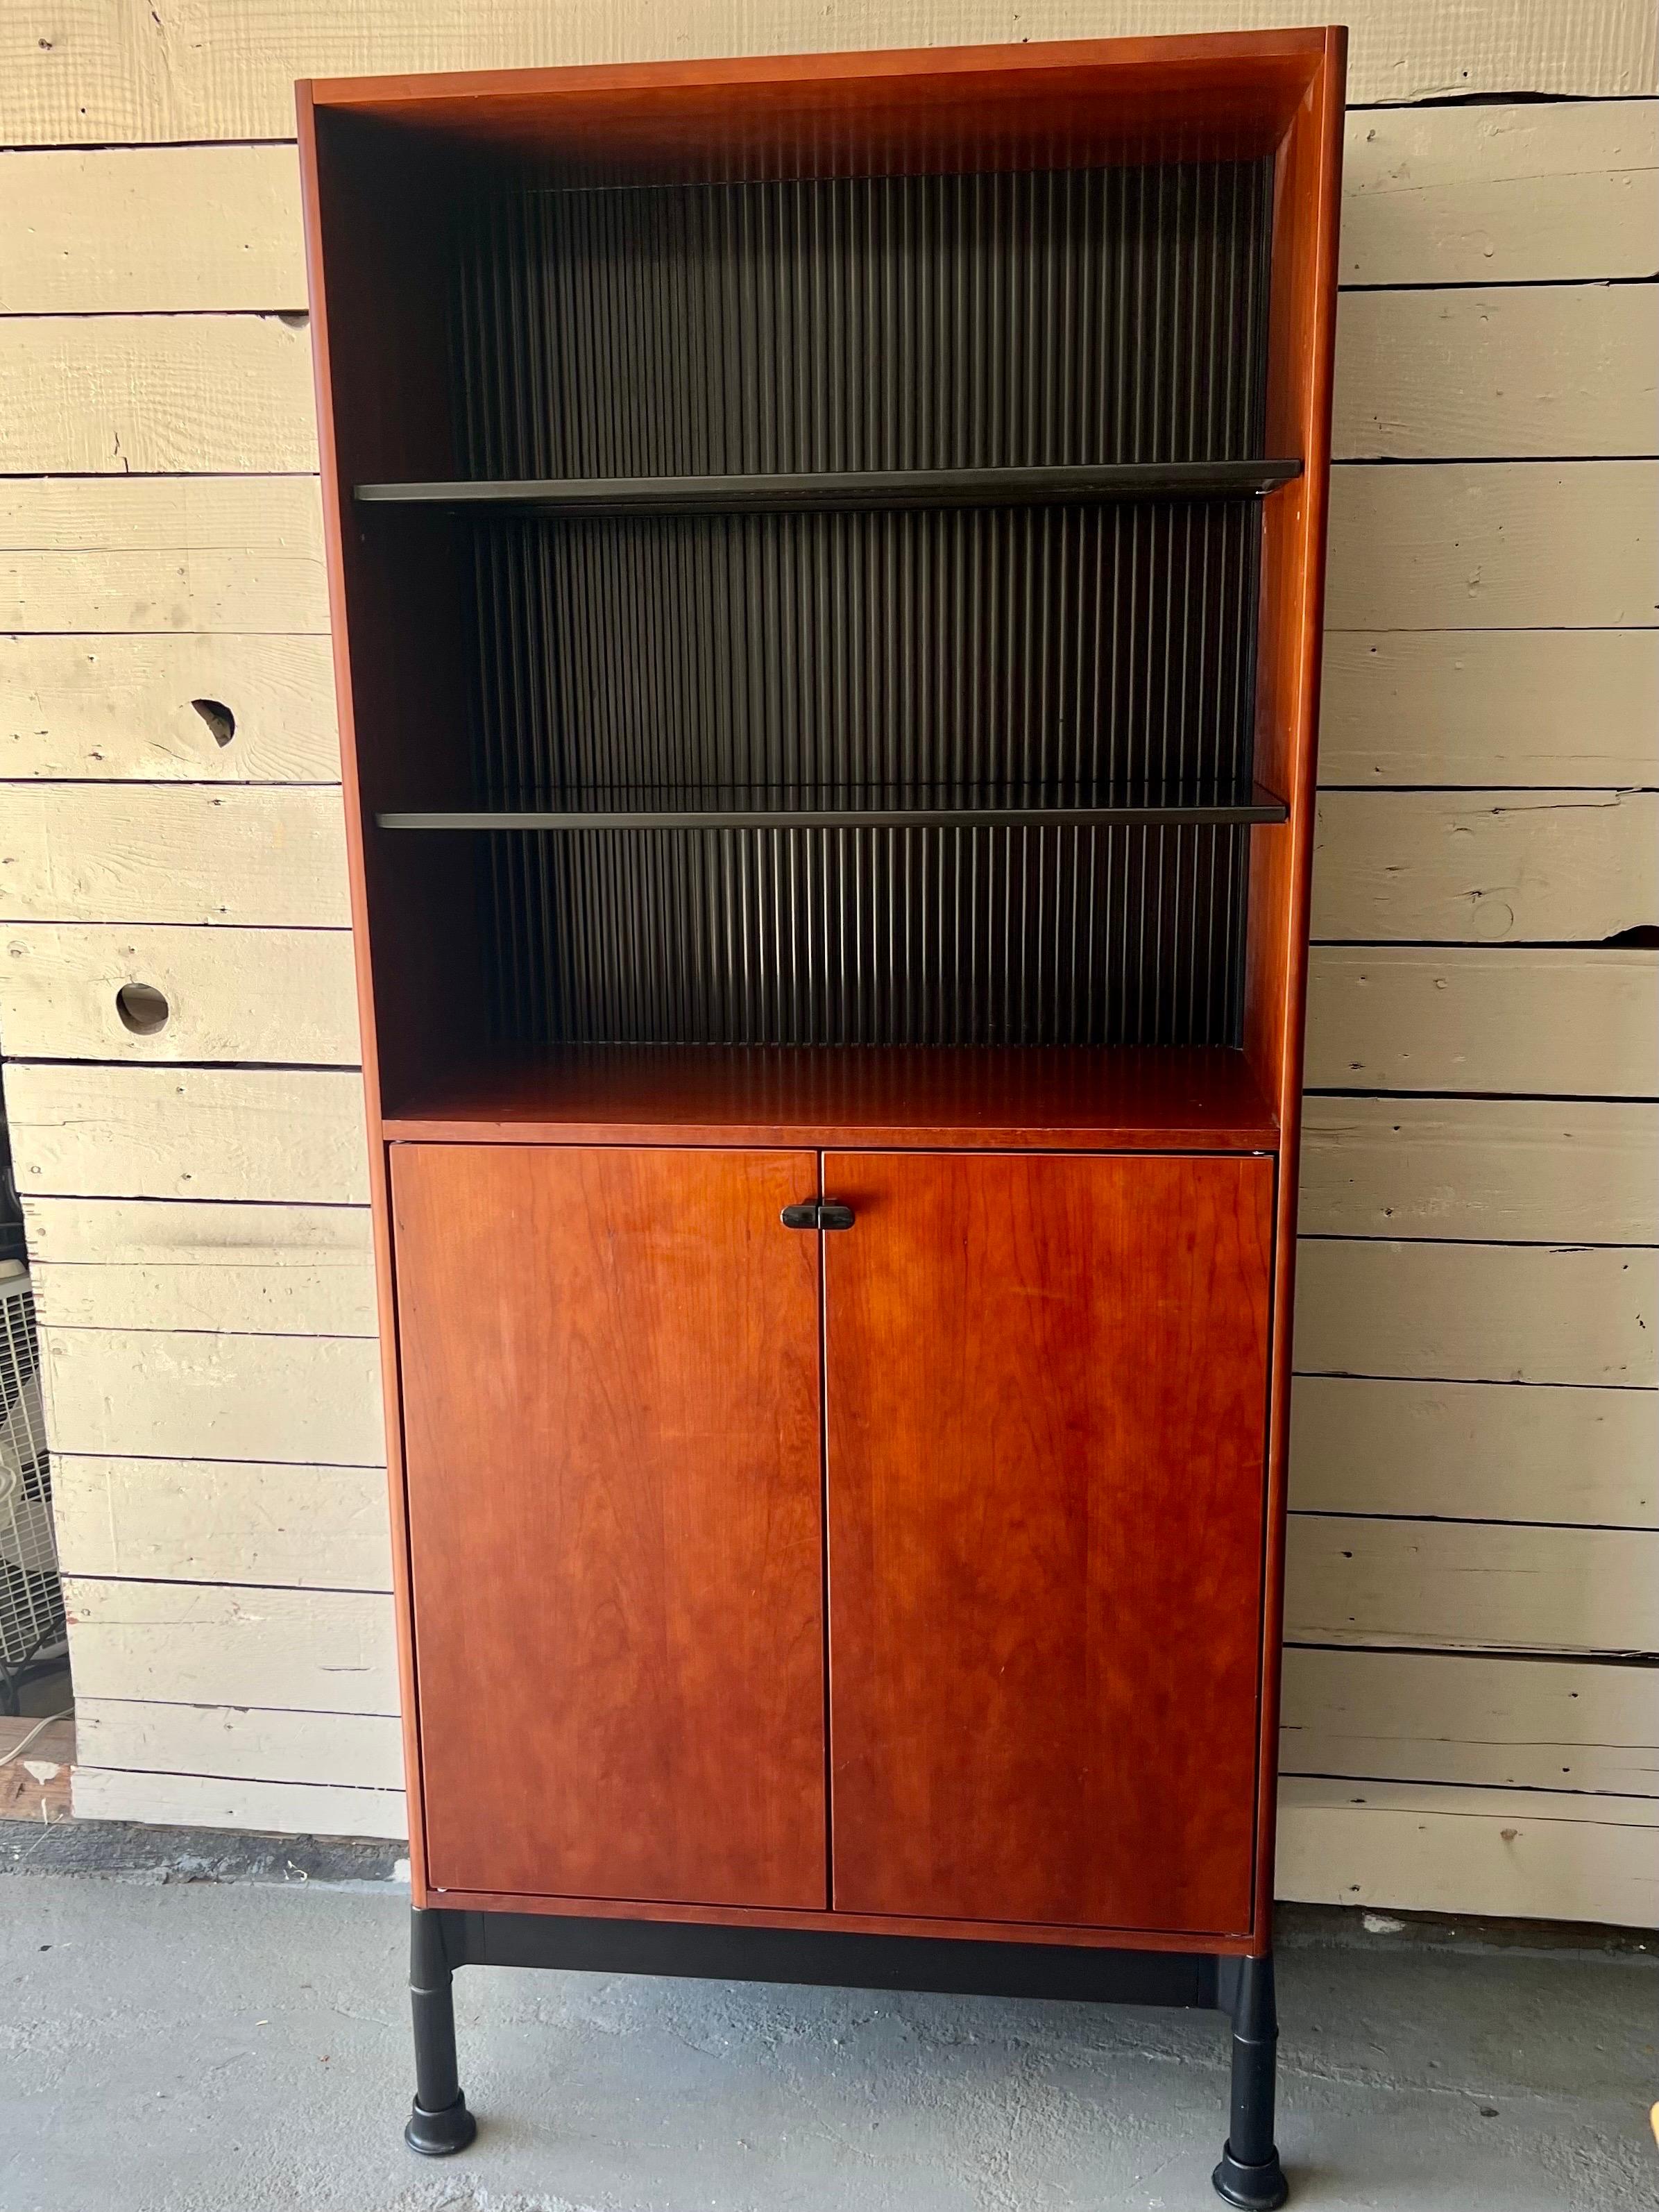 Designed by Geoff Hollington as part of his Relay Office Series for Herman Miller, this fantastic piece is comprised of two parts, a lower cabinet behind doors and open air upper shelving.  The bottom cabinet hides away one adjustable cherry wood